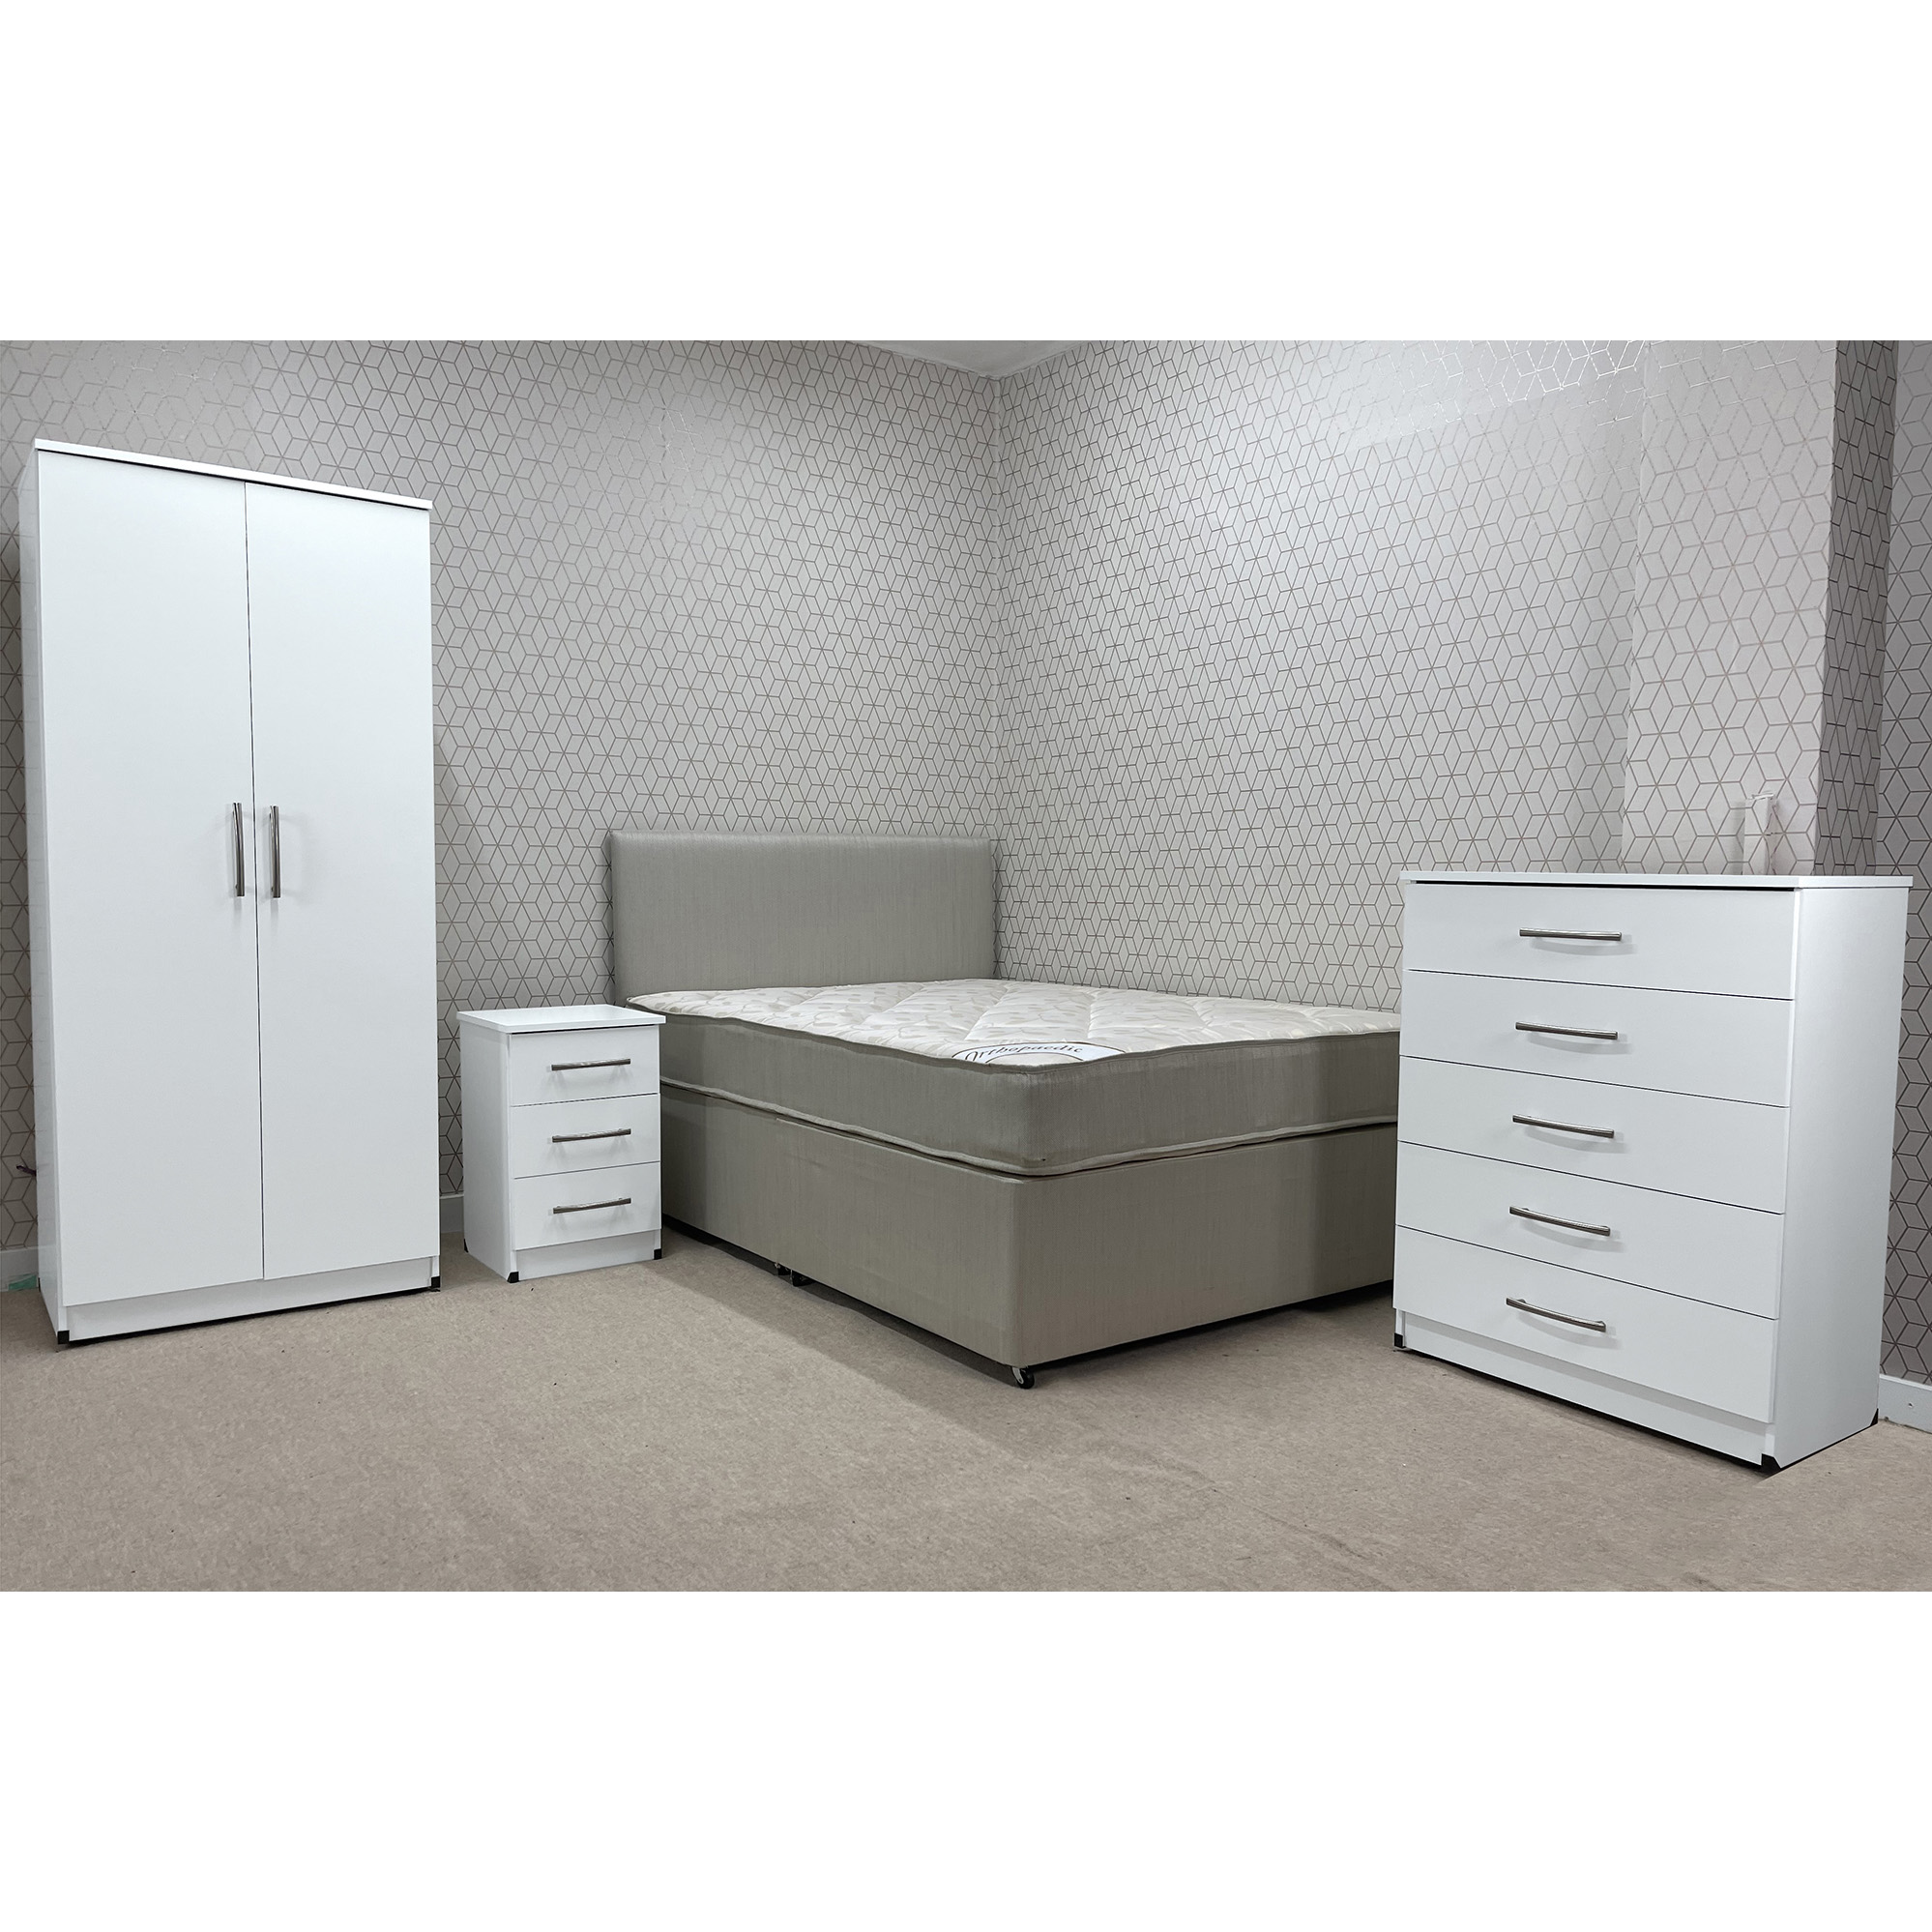 hmo furniture package landlord furniture package 1d